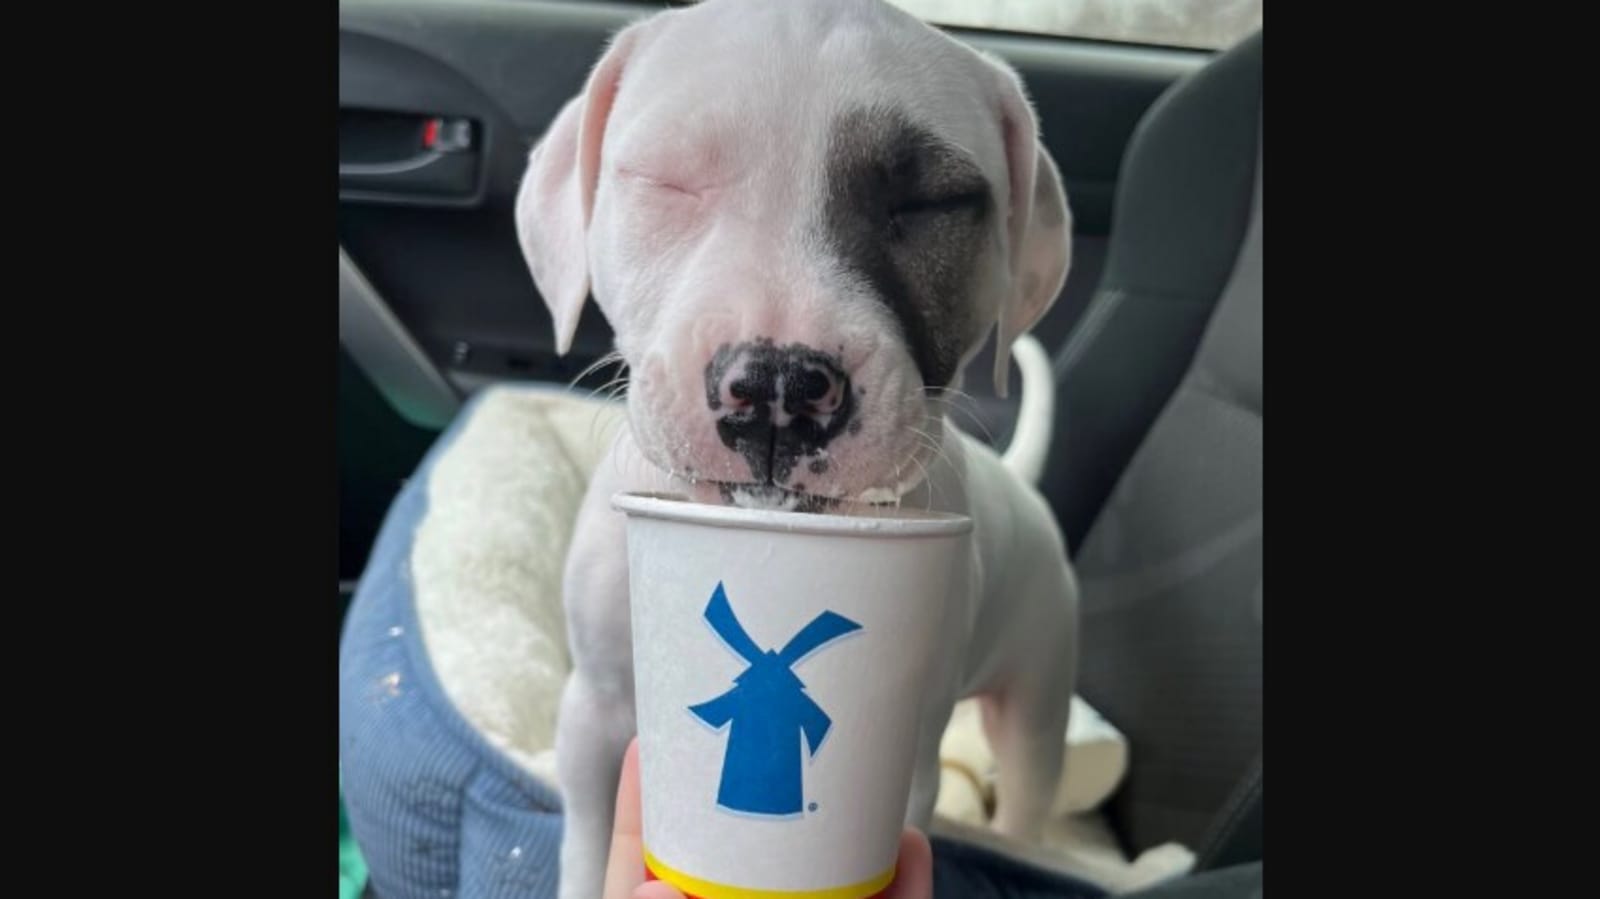 Dog tries pup cup for the first time, pictures show his happy reaction